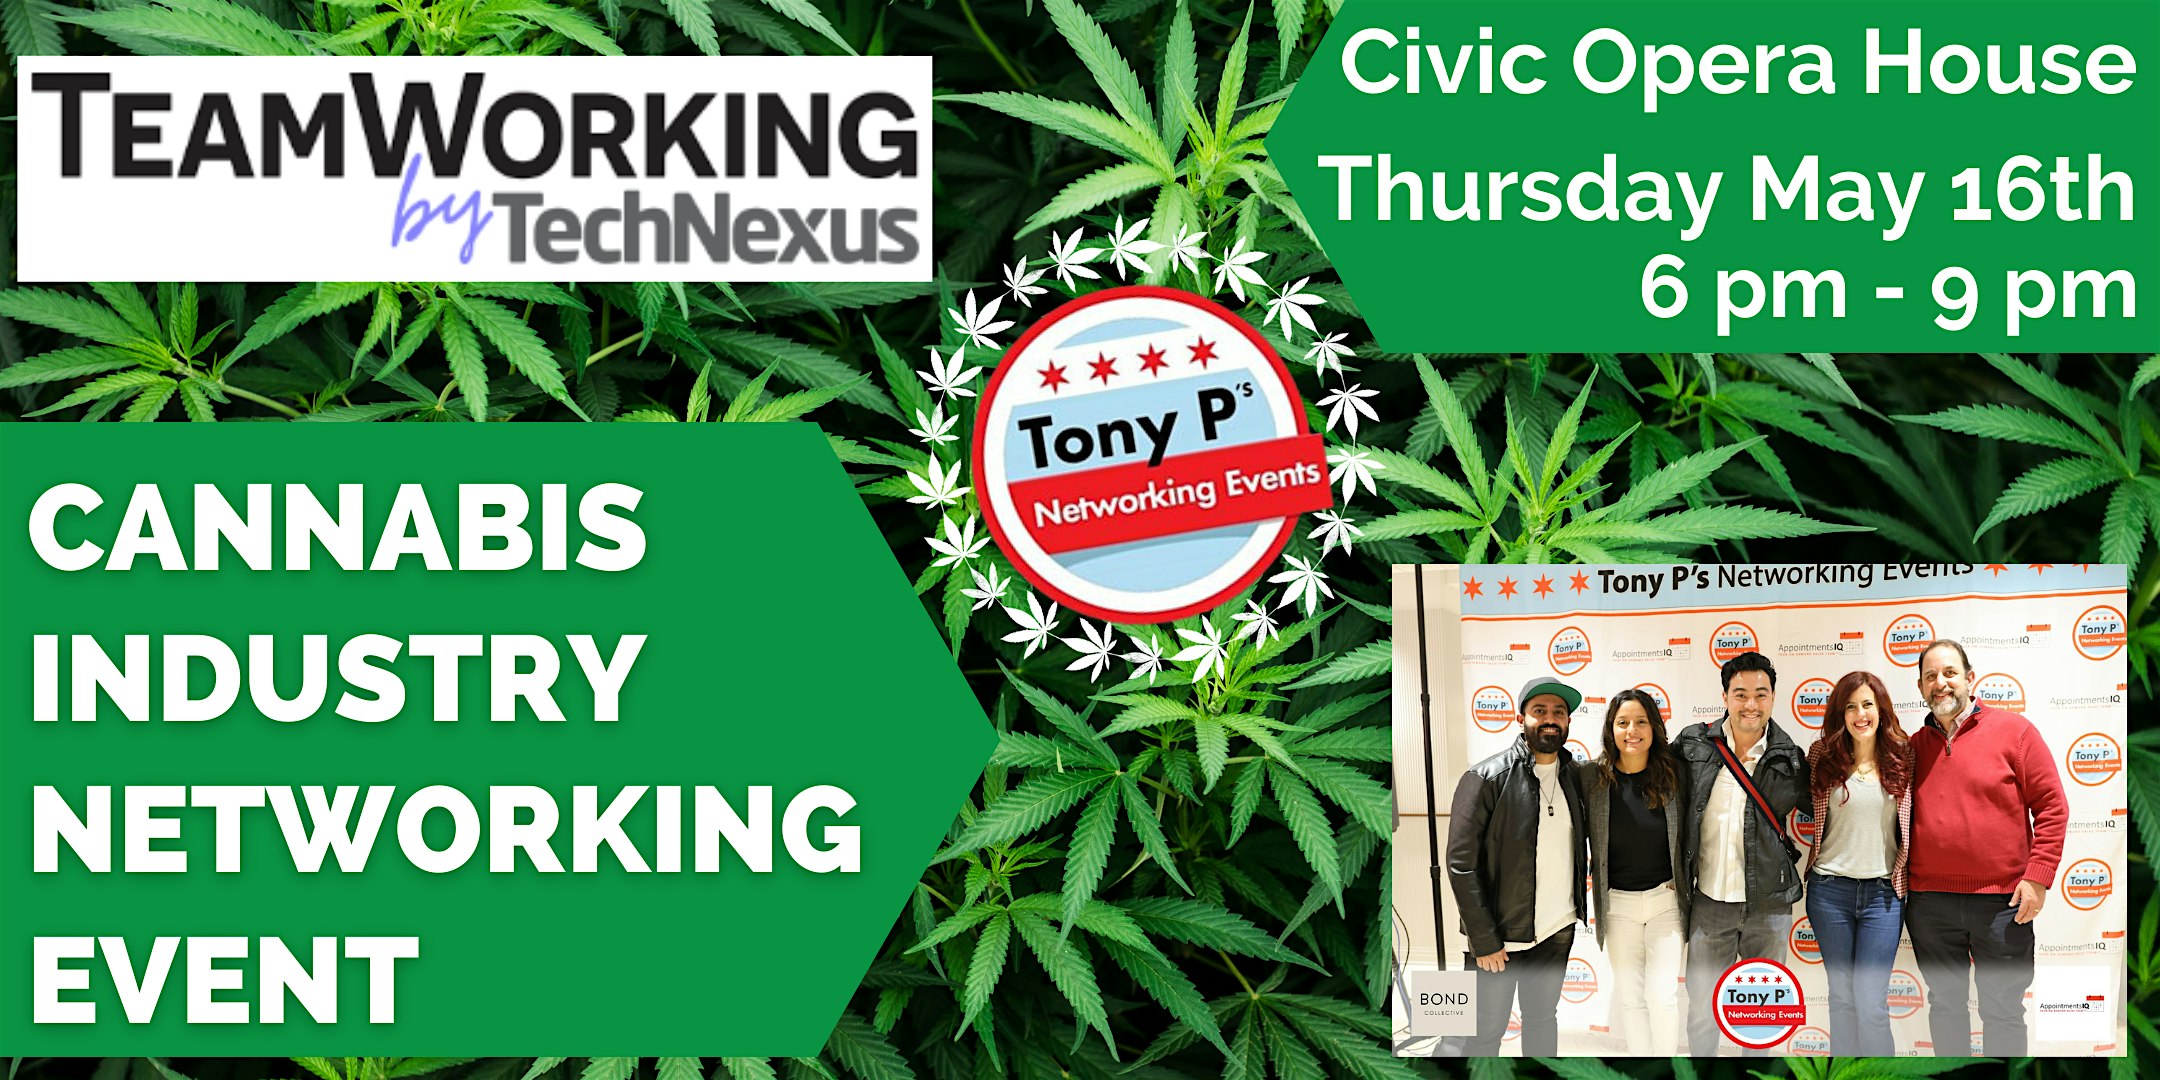 Tony P’s Cannabis Industry Networking Event: Thursday May 16th